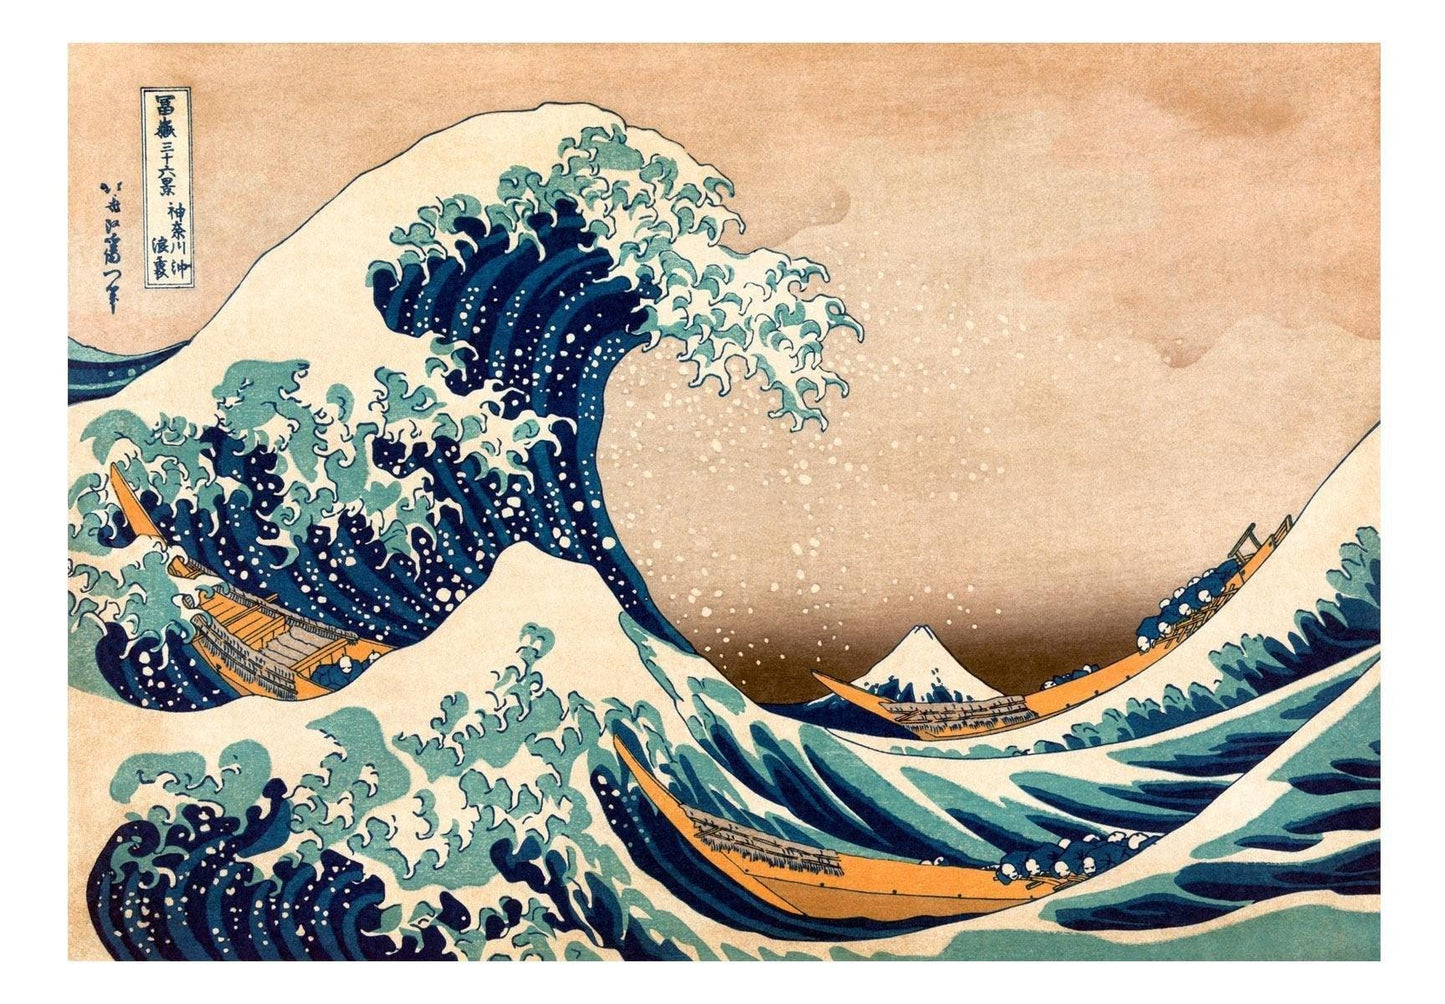 Peel and stick wall mural - Hokusai: The Great Wave off Kanagawa (Reproduction) - www.trendingbestsellers.com